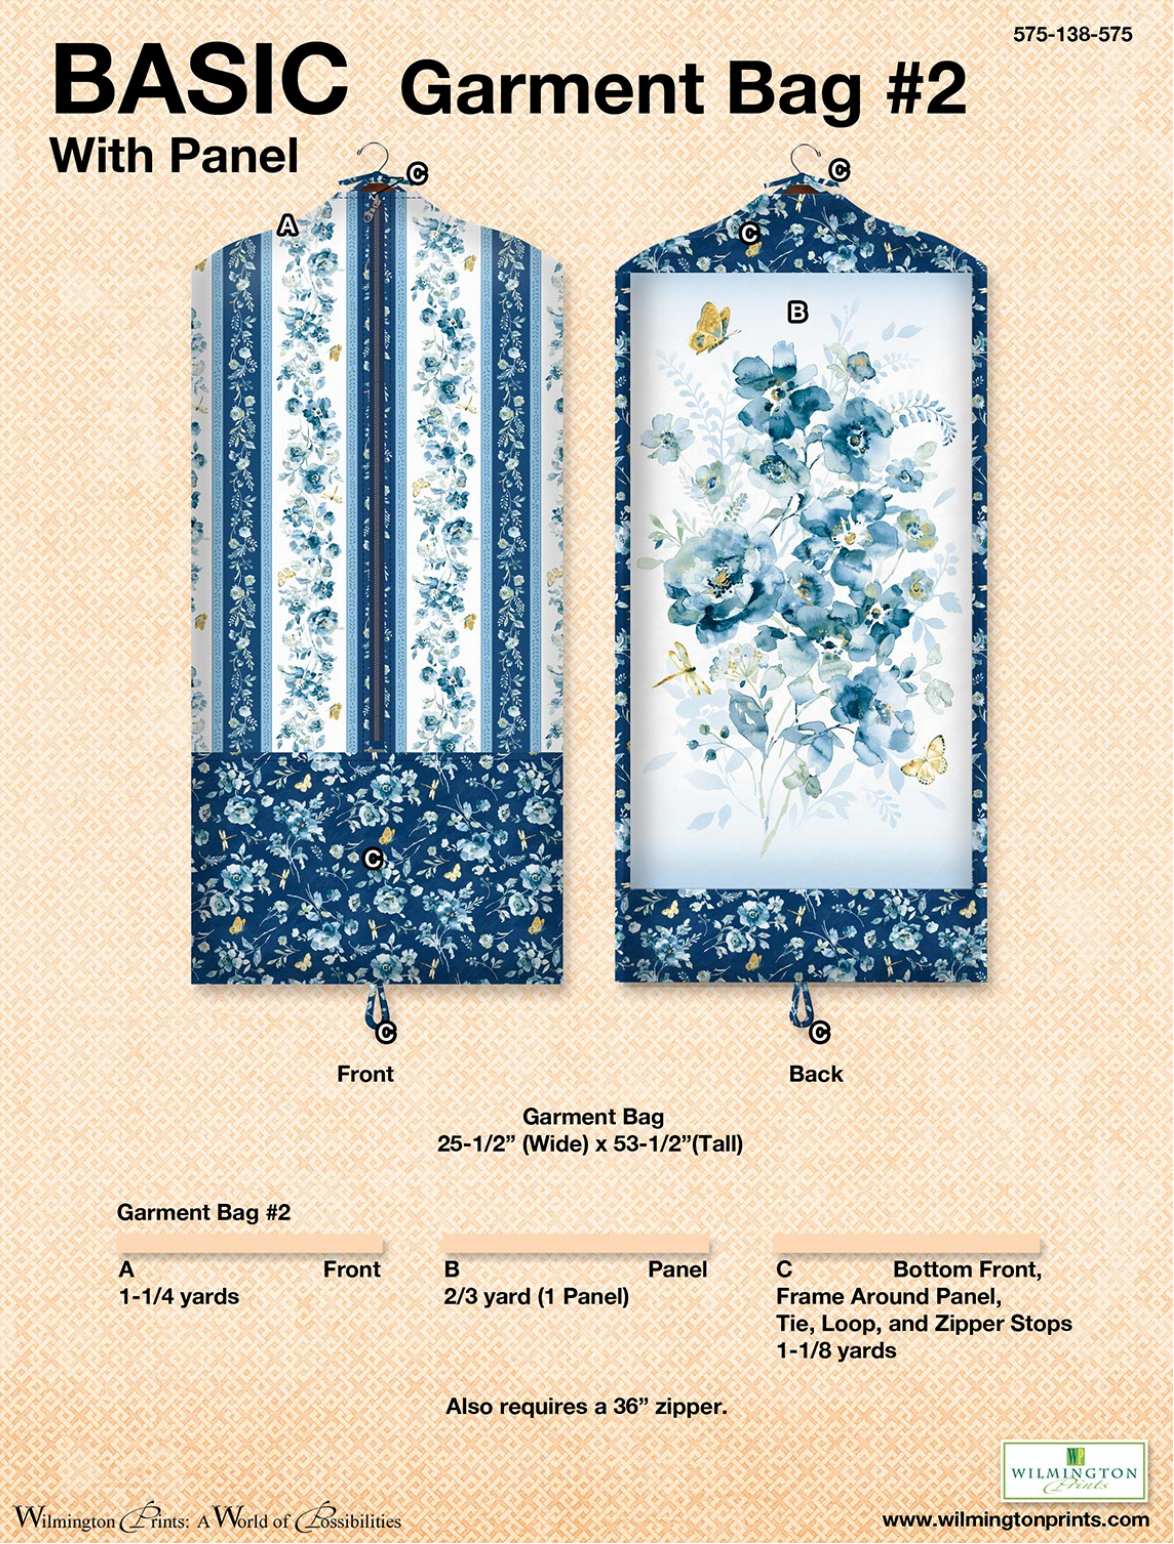 Basic Garment Bag with Panel 2 - Free Digital Download-Wilmington Prints-My Favorite Quilt Store